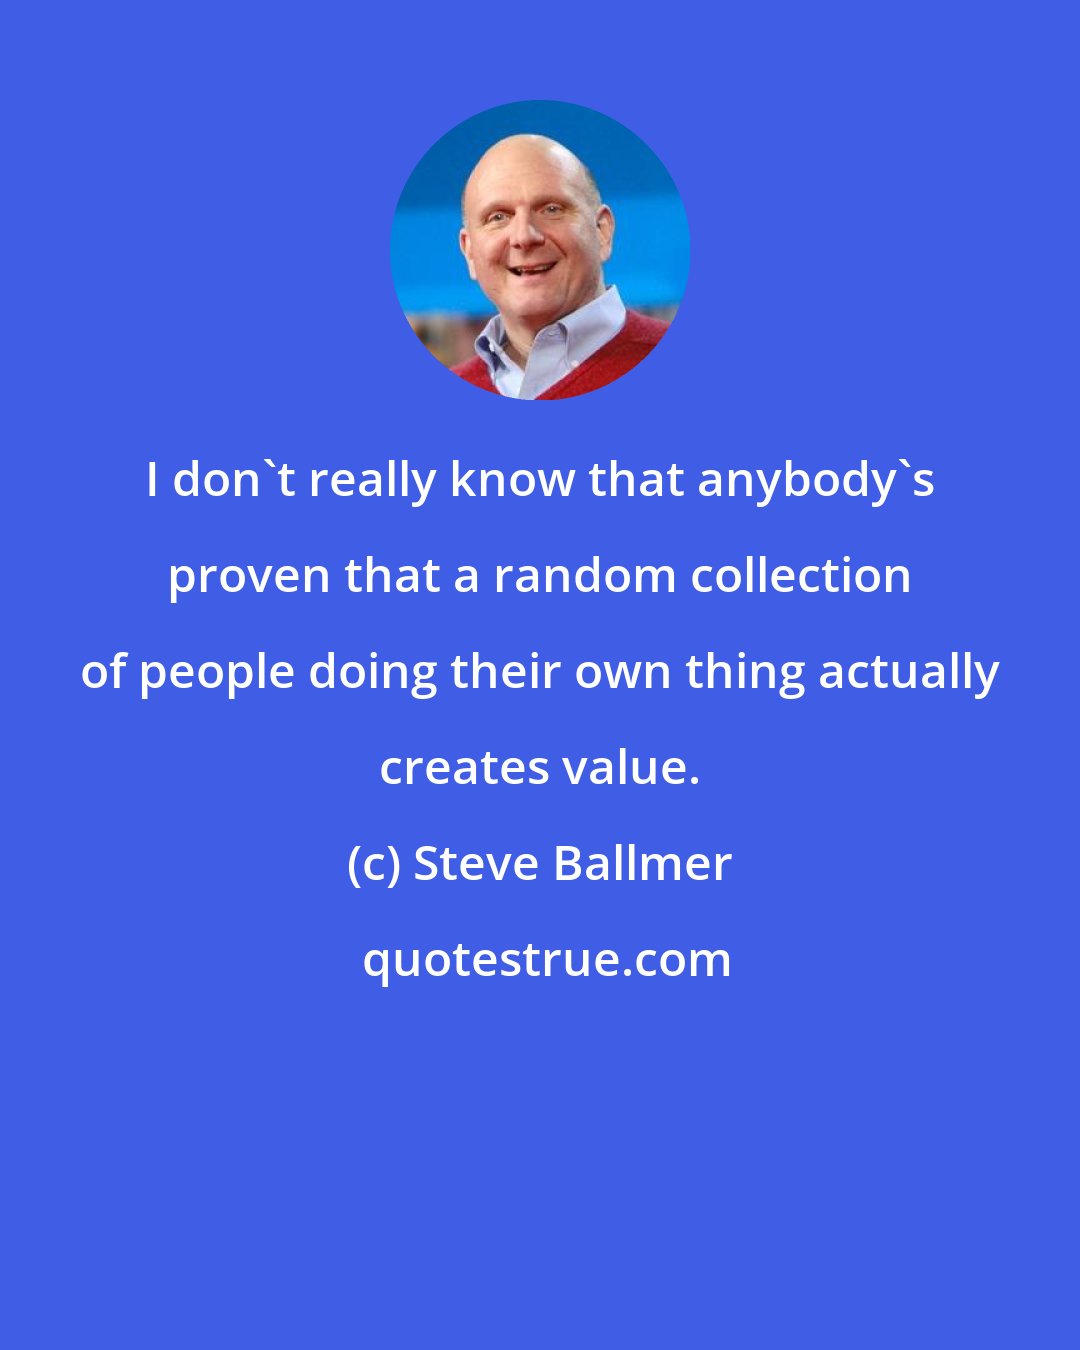 Steve Ballmer: I don't really know that anybody's proven that a random collection of people doing their own thing actually creates value.